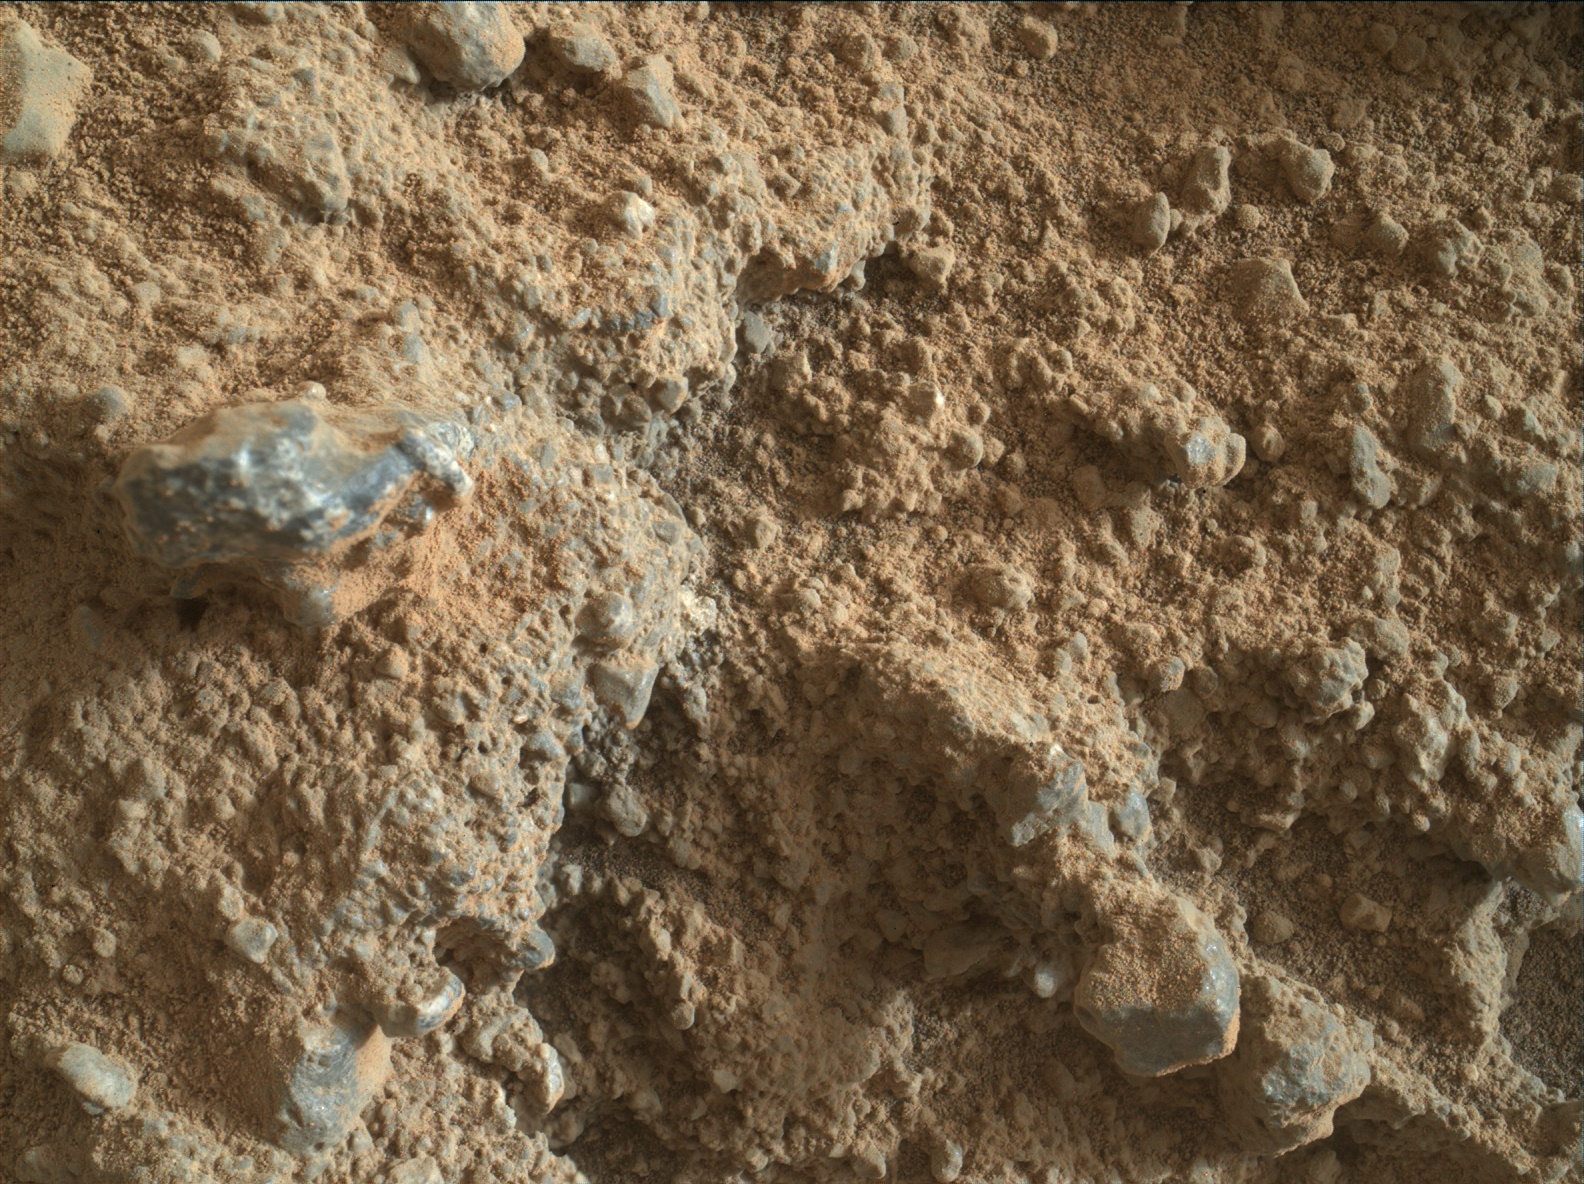 Nasa's Mars rover Curiosity acquired this image using its Mars Hand Lens Imager (MAHLI) on Sol 401